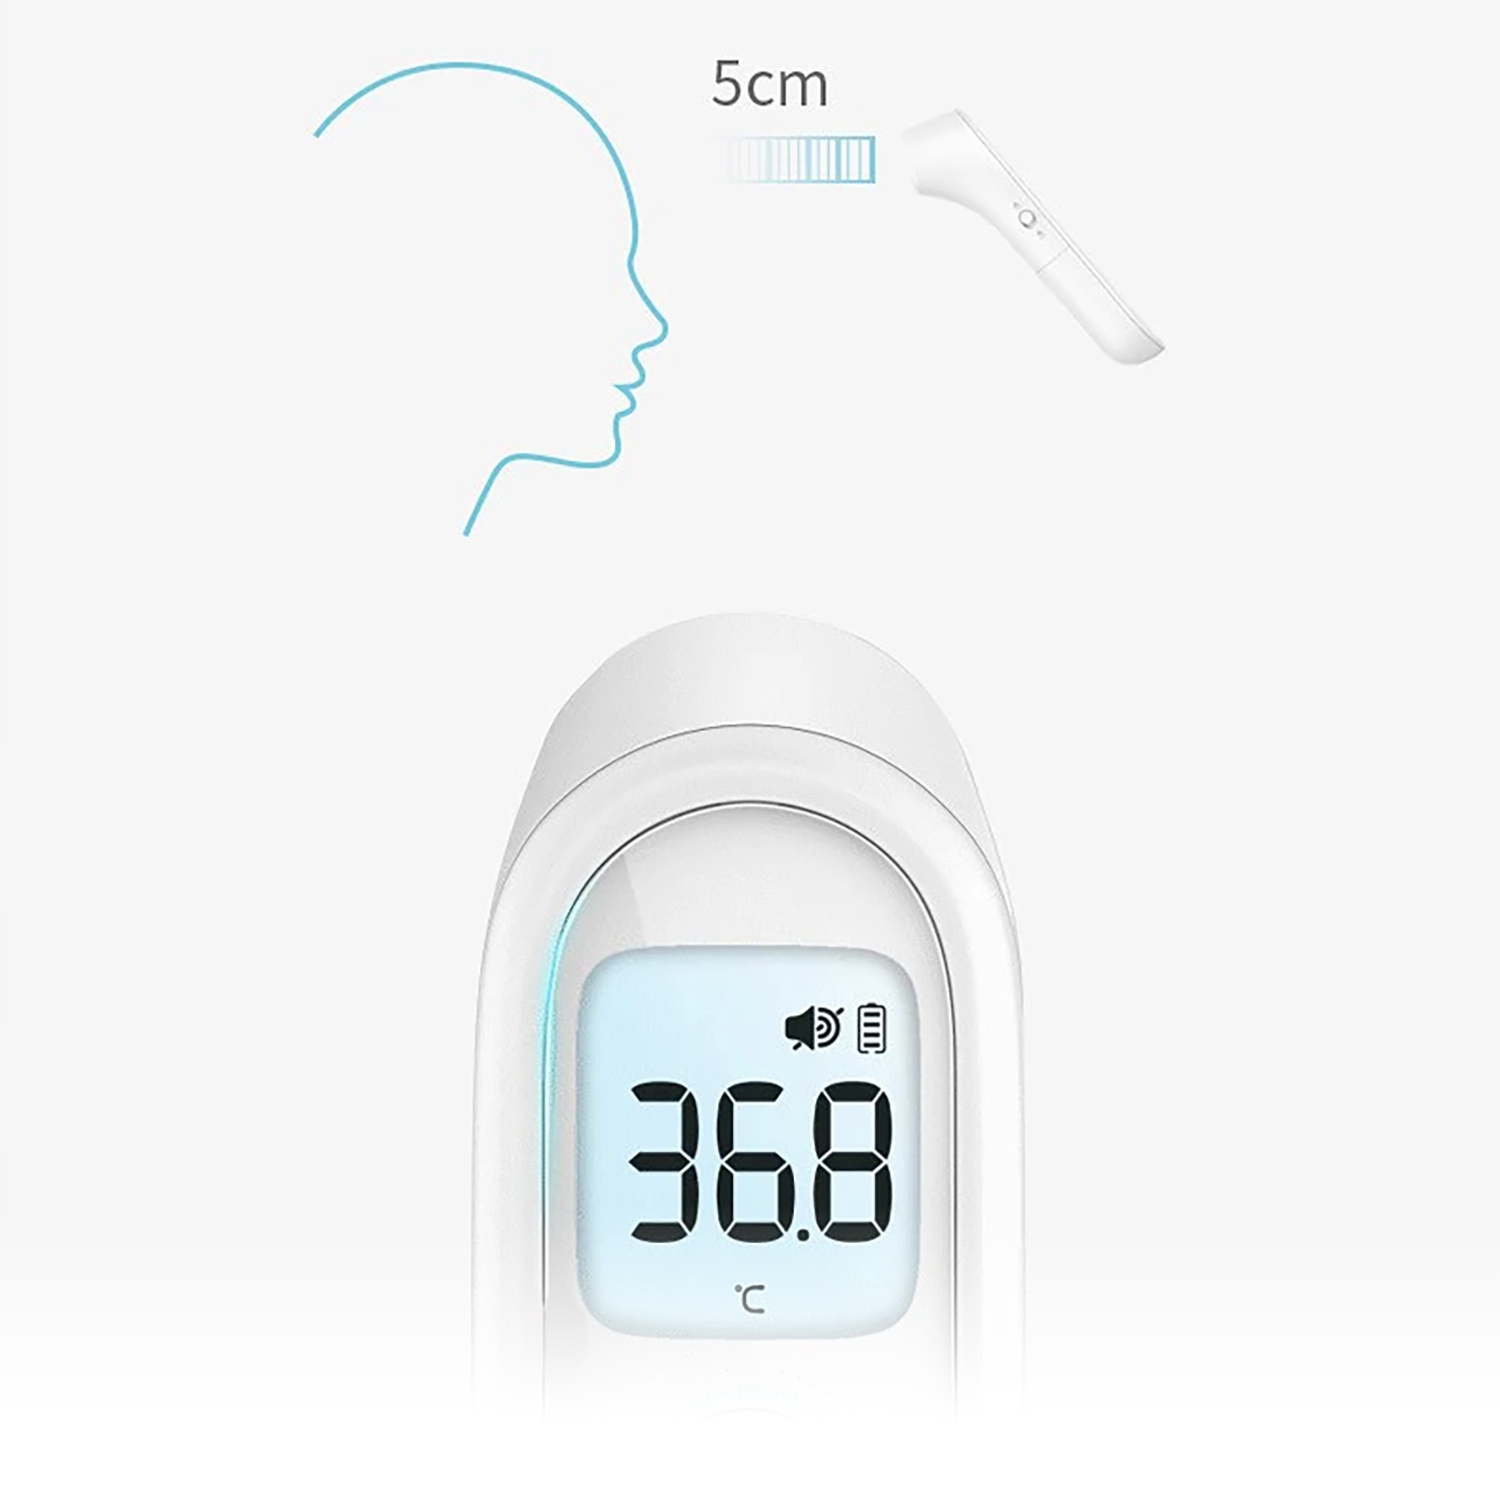 Voorhoofd thermometer - infrarood - Yuwell